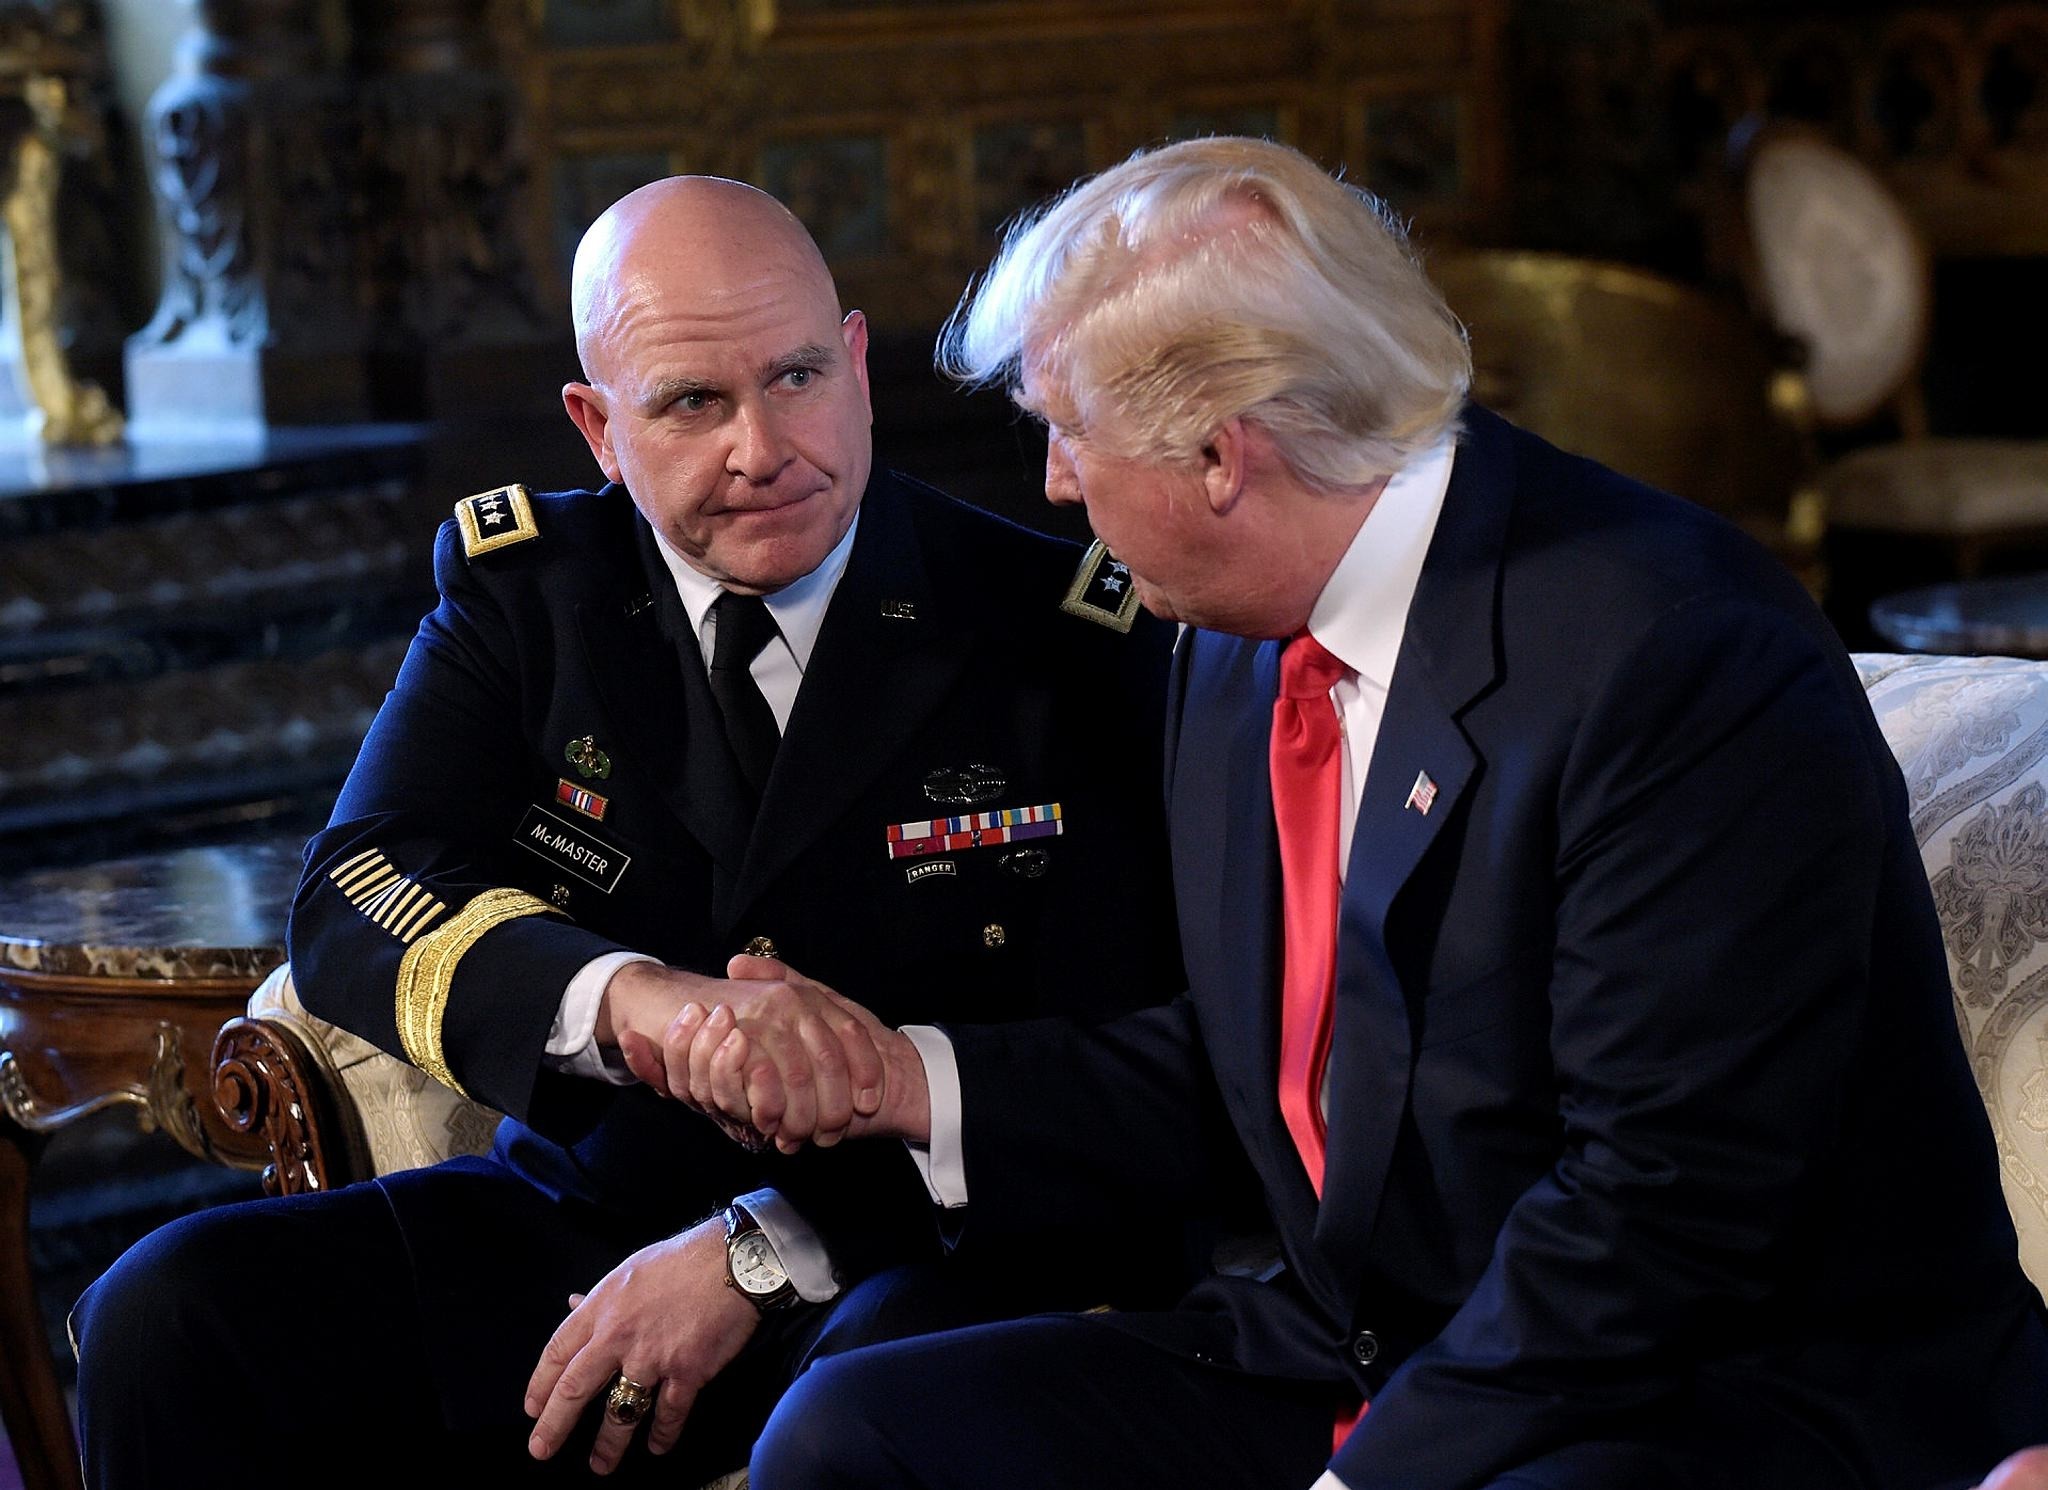 President Donald Trump, right, shakes hands with Army Lt. Gen. H.R. McMaster, left. (AP Photo)